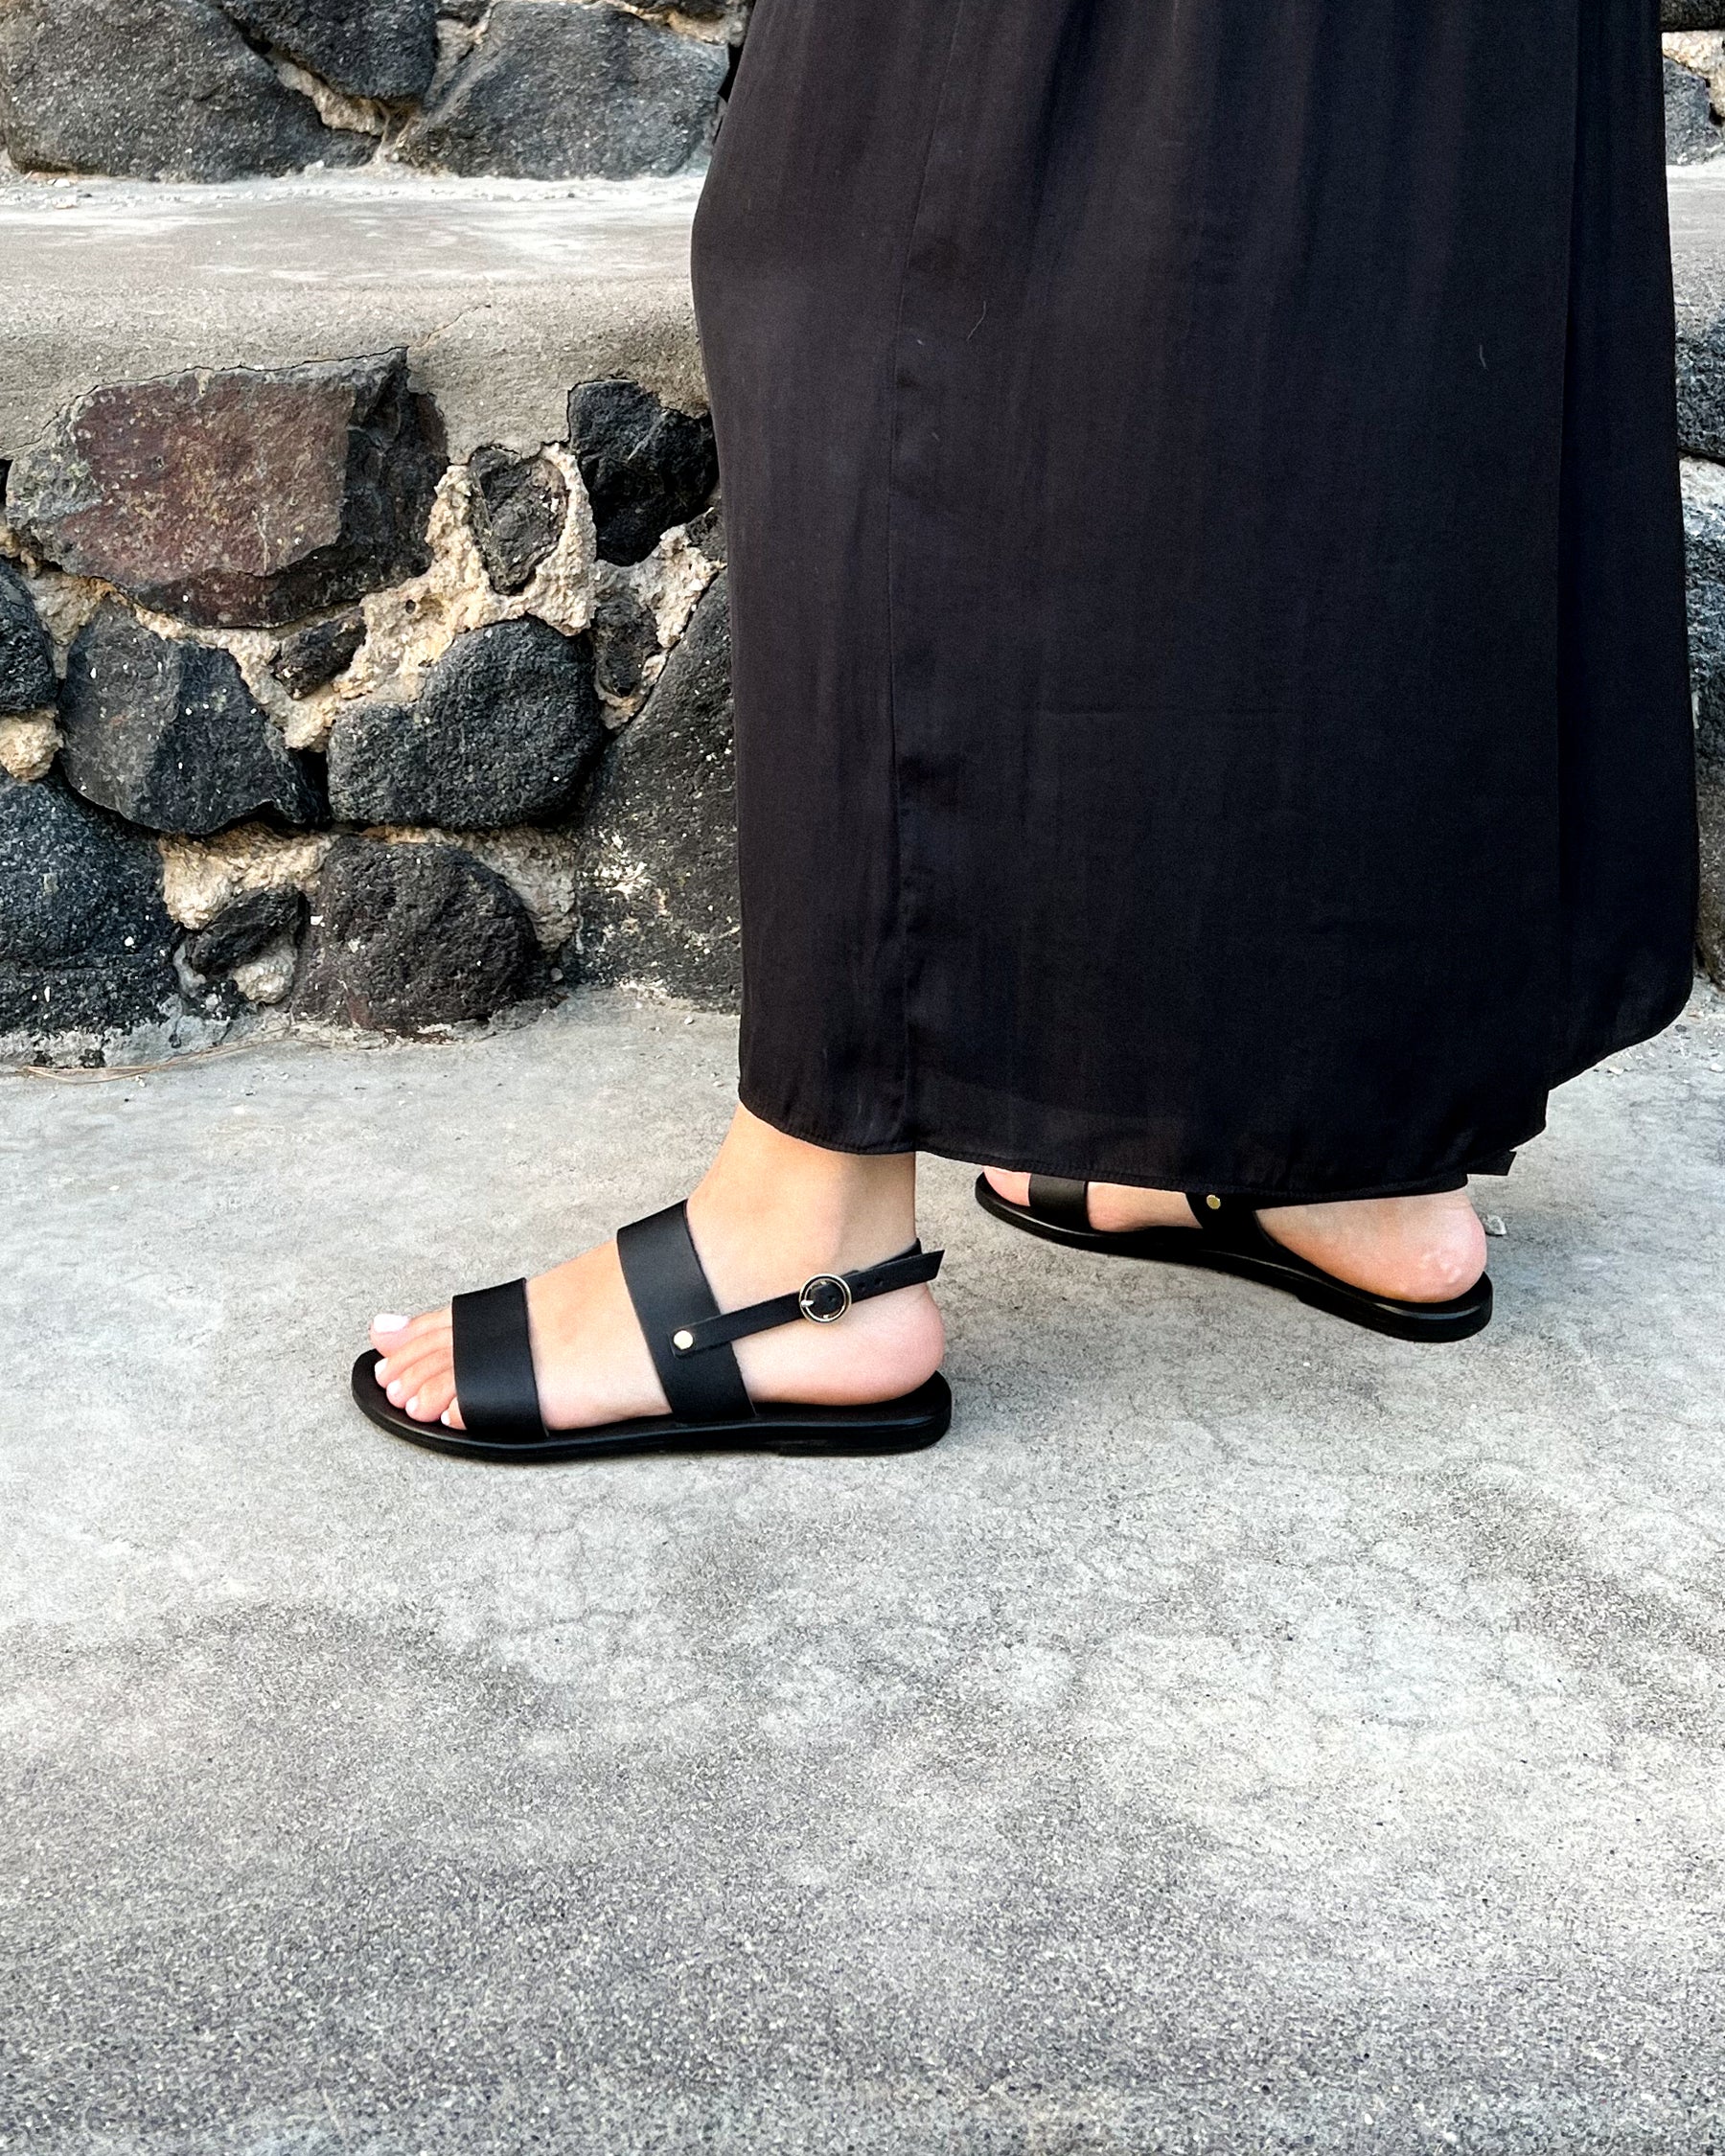 Leather sandals | Flat sandals | Strappy sandals | Women